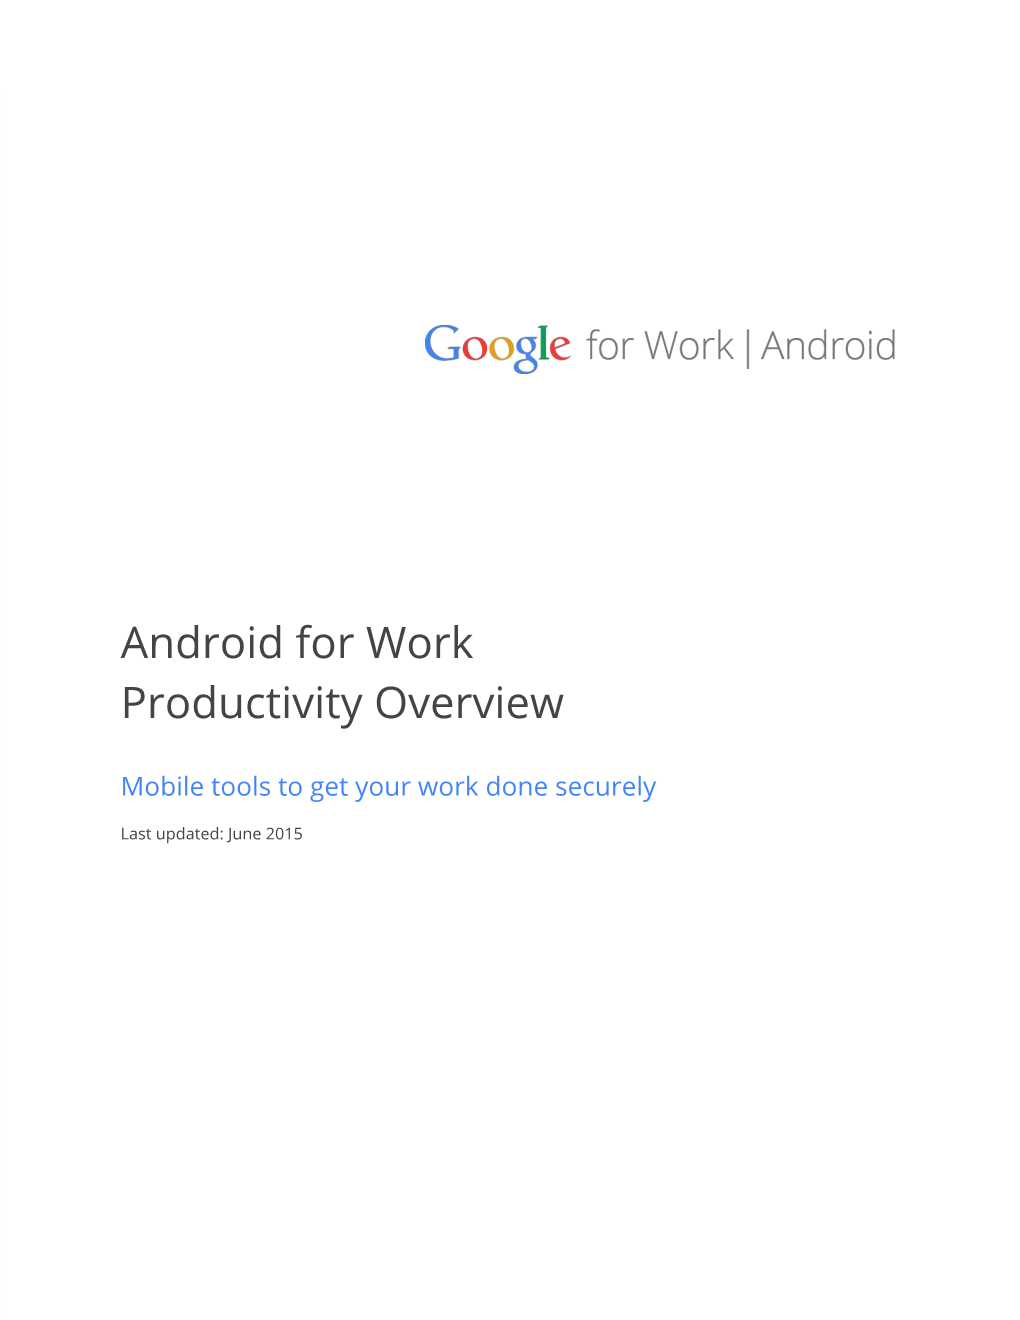 Android for Work Productivity Overview